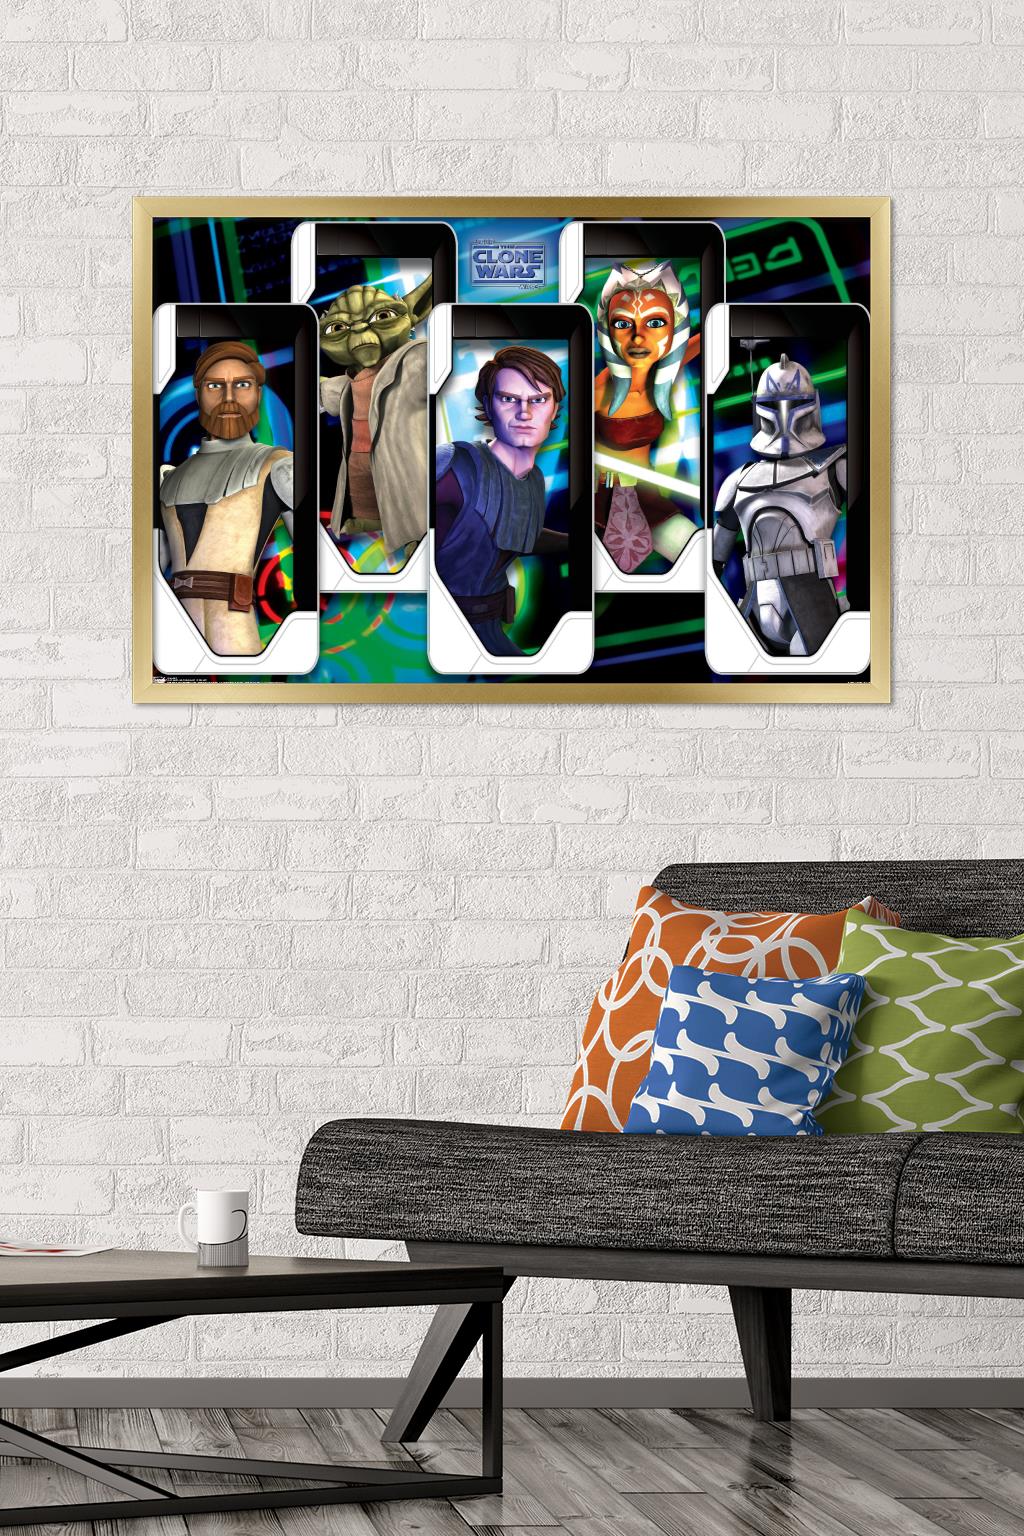 Star Wars: The Clone Wars - Close Ups Wall Poster, 22.375" x 34", Framed - image 2 of 5